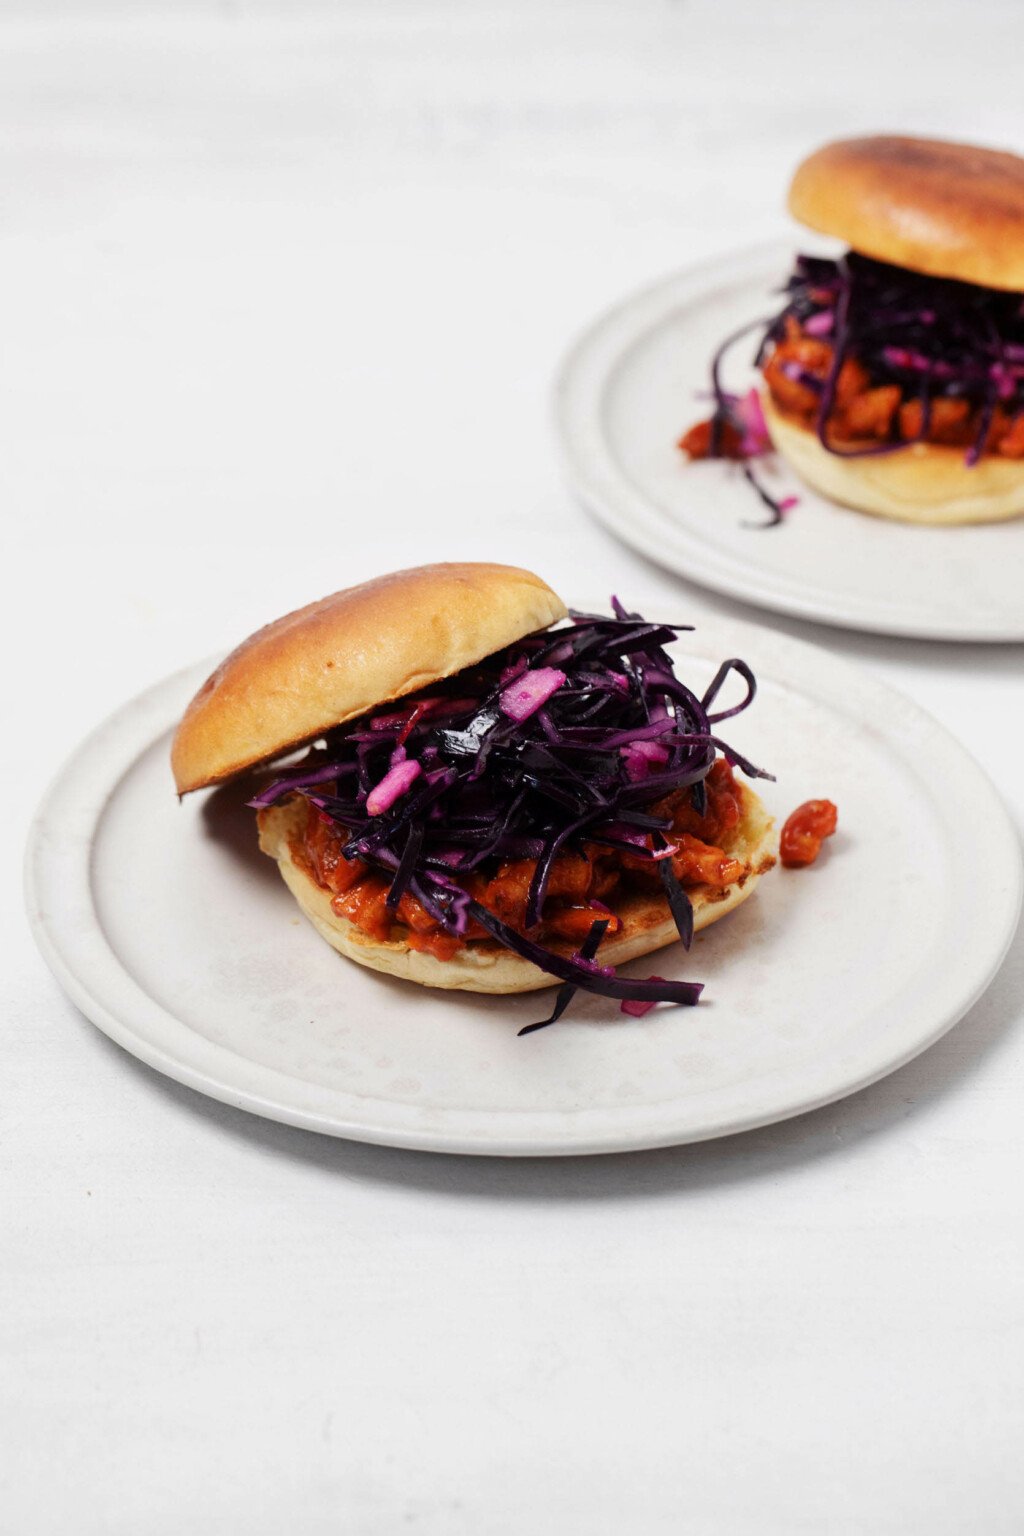 Burger buns have been stacked with a vegan version of BBQ chicken and a crunchy red cabbage slaw. They rest on two round, rimmed white plates.